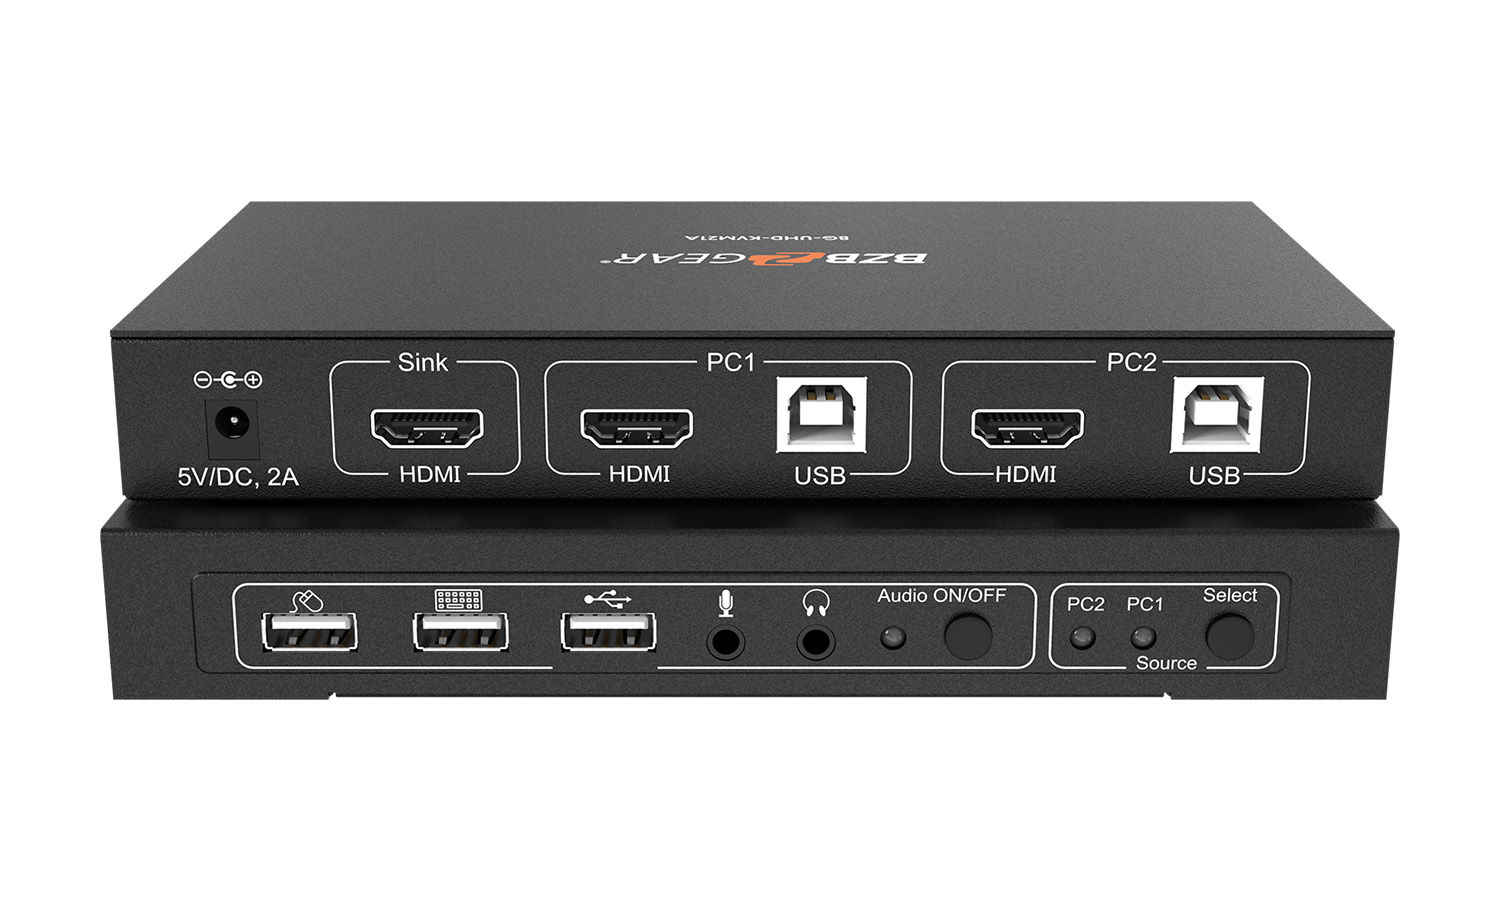 BG-UHD-KVM21A 2X1 1080P KVM Switcher with USB 2.0 Ports for Peripherals and 3.5mm Jacks for Audio Support by BZBGEAR